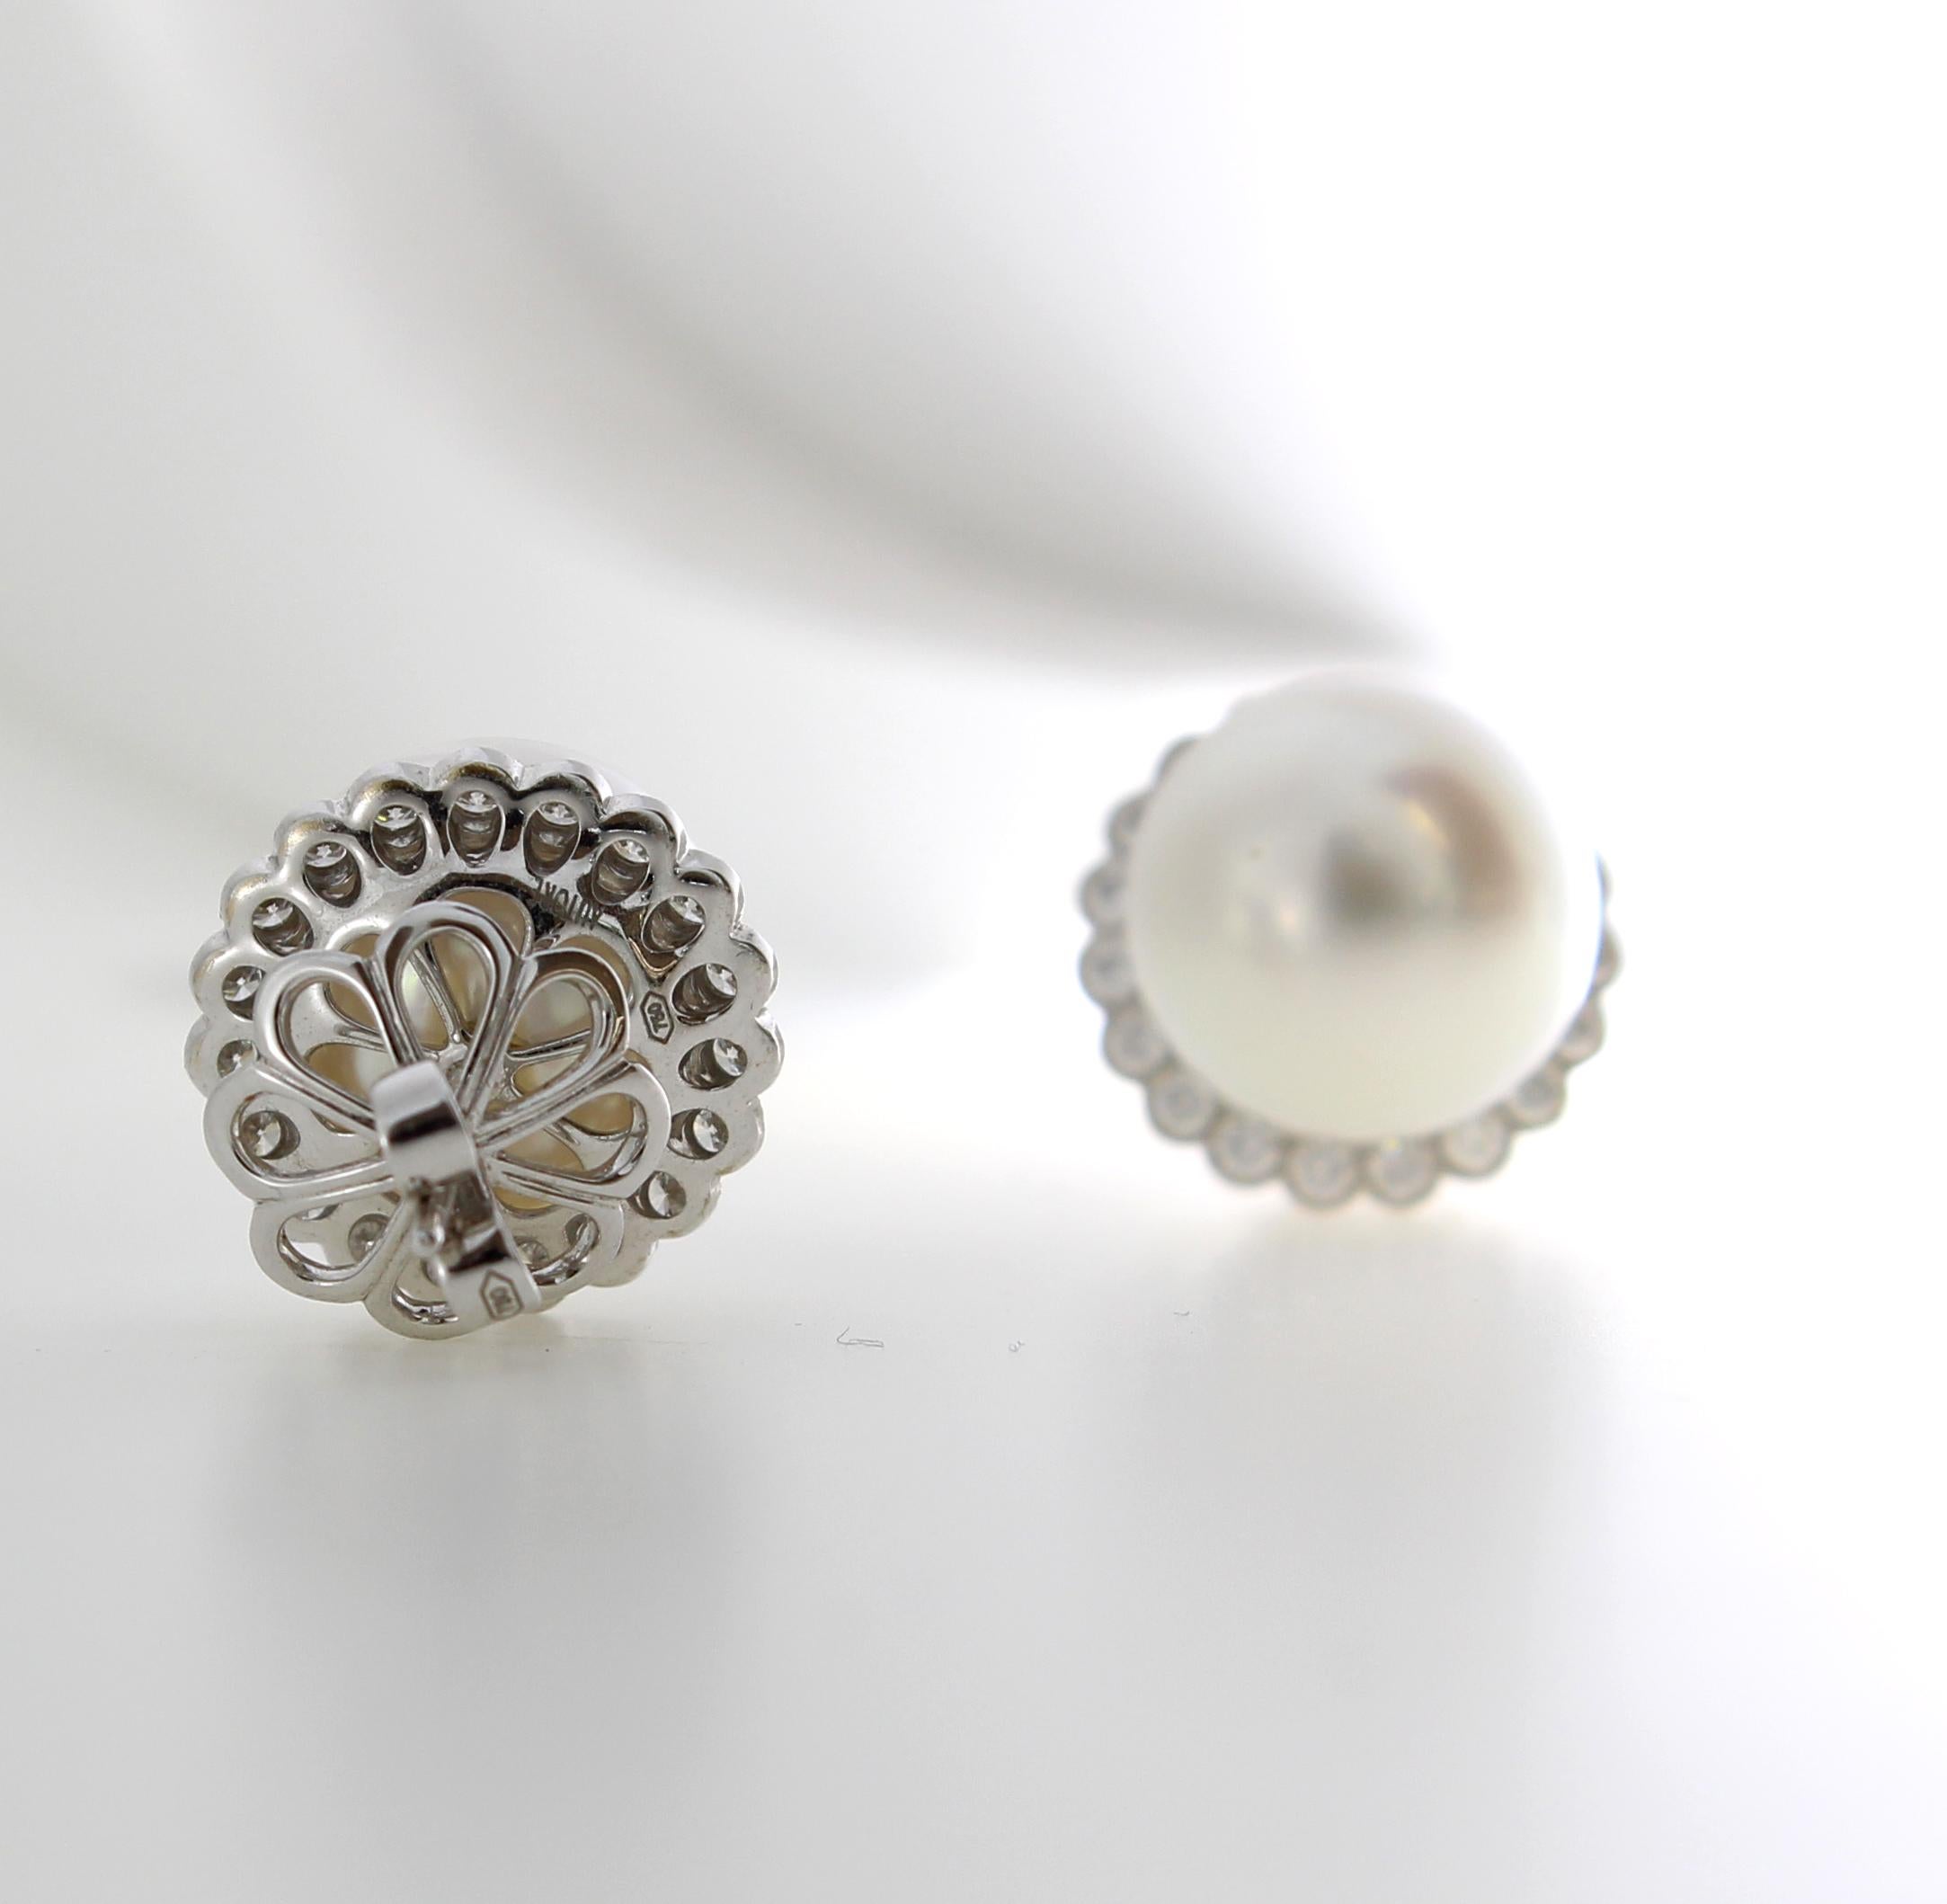 18k White Gold with White Diamonds (0.808ct) with 12mm White Drop Semi South Sea Pearls. 